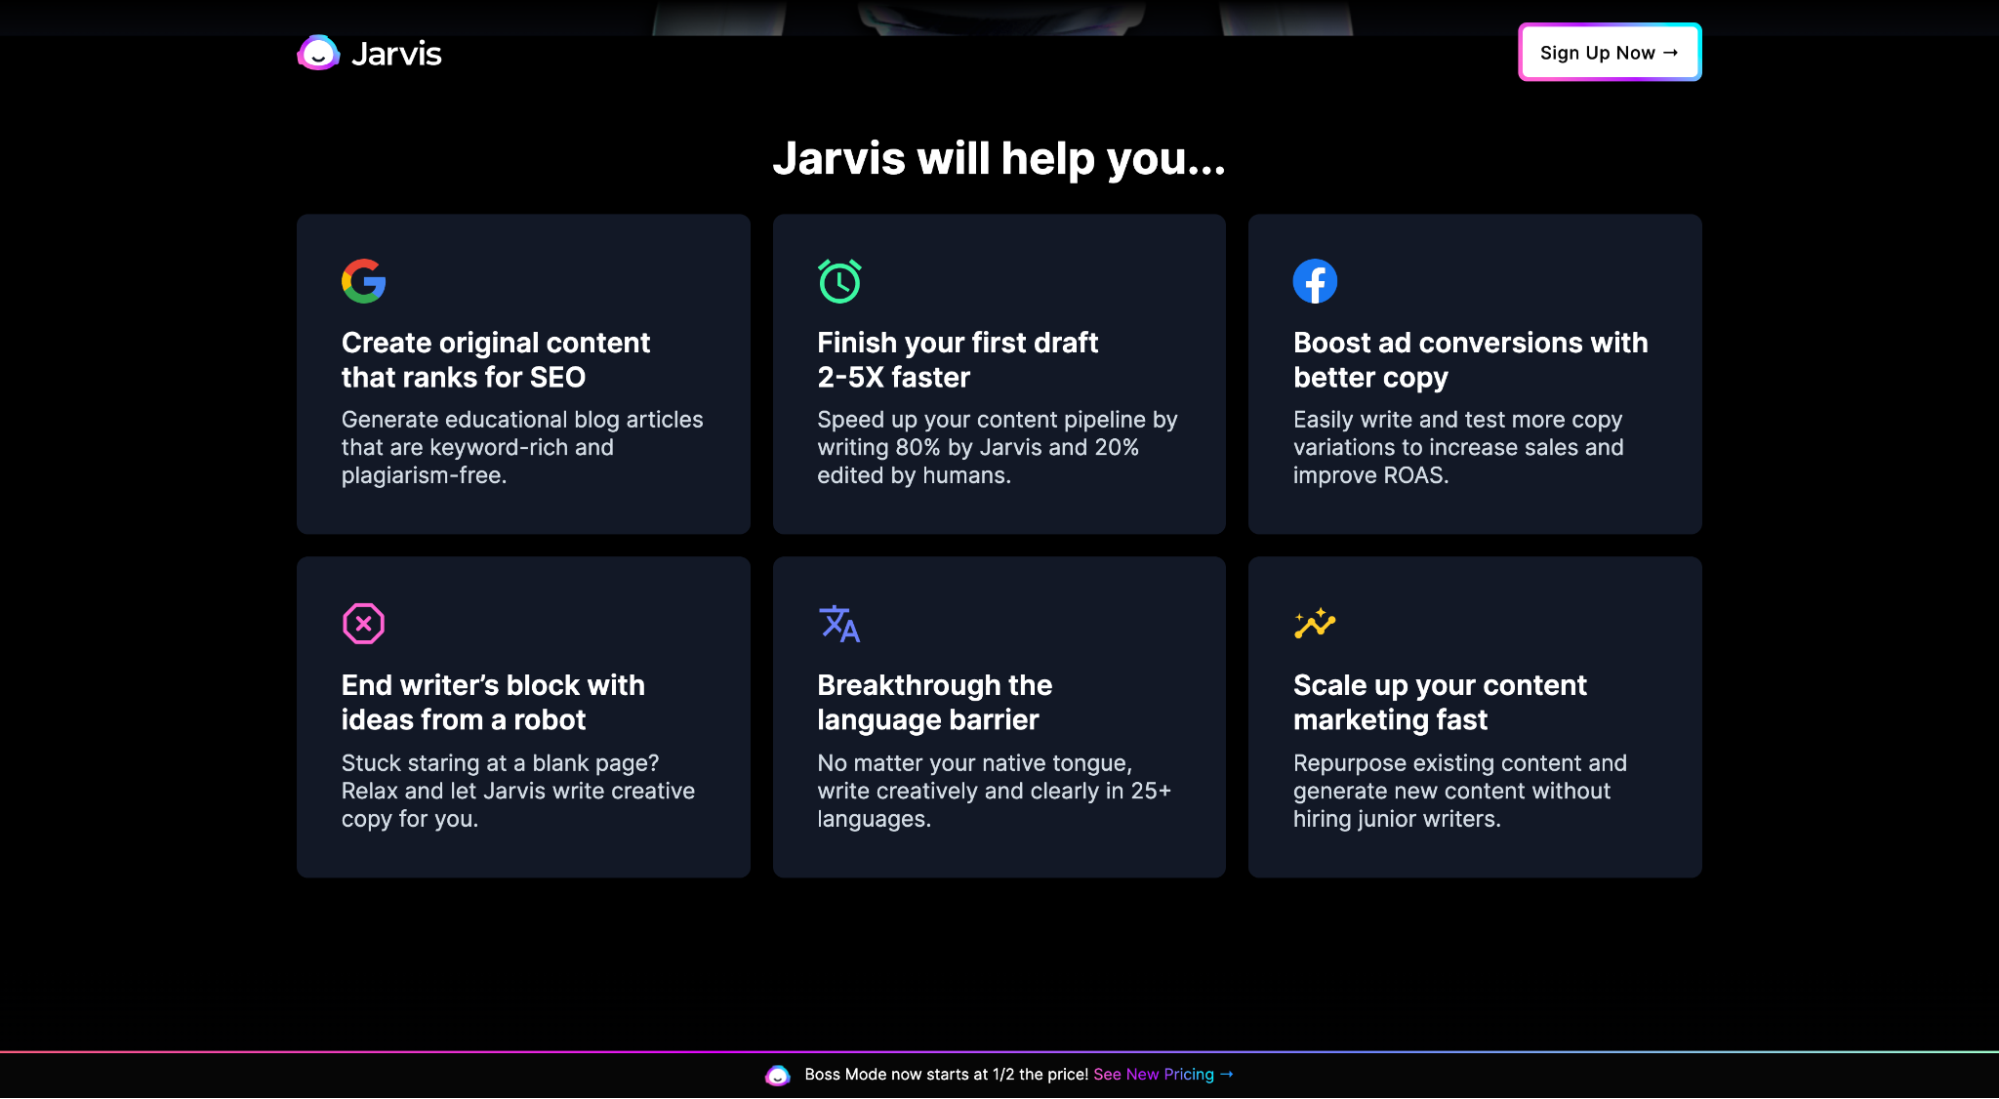 Jarvis nails benefits over features